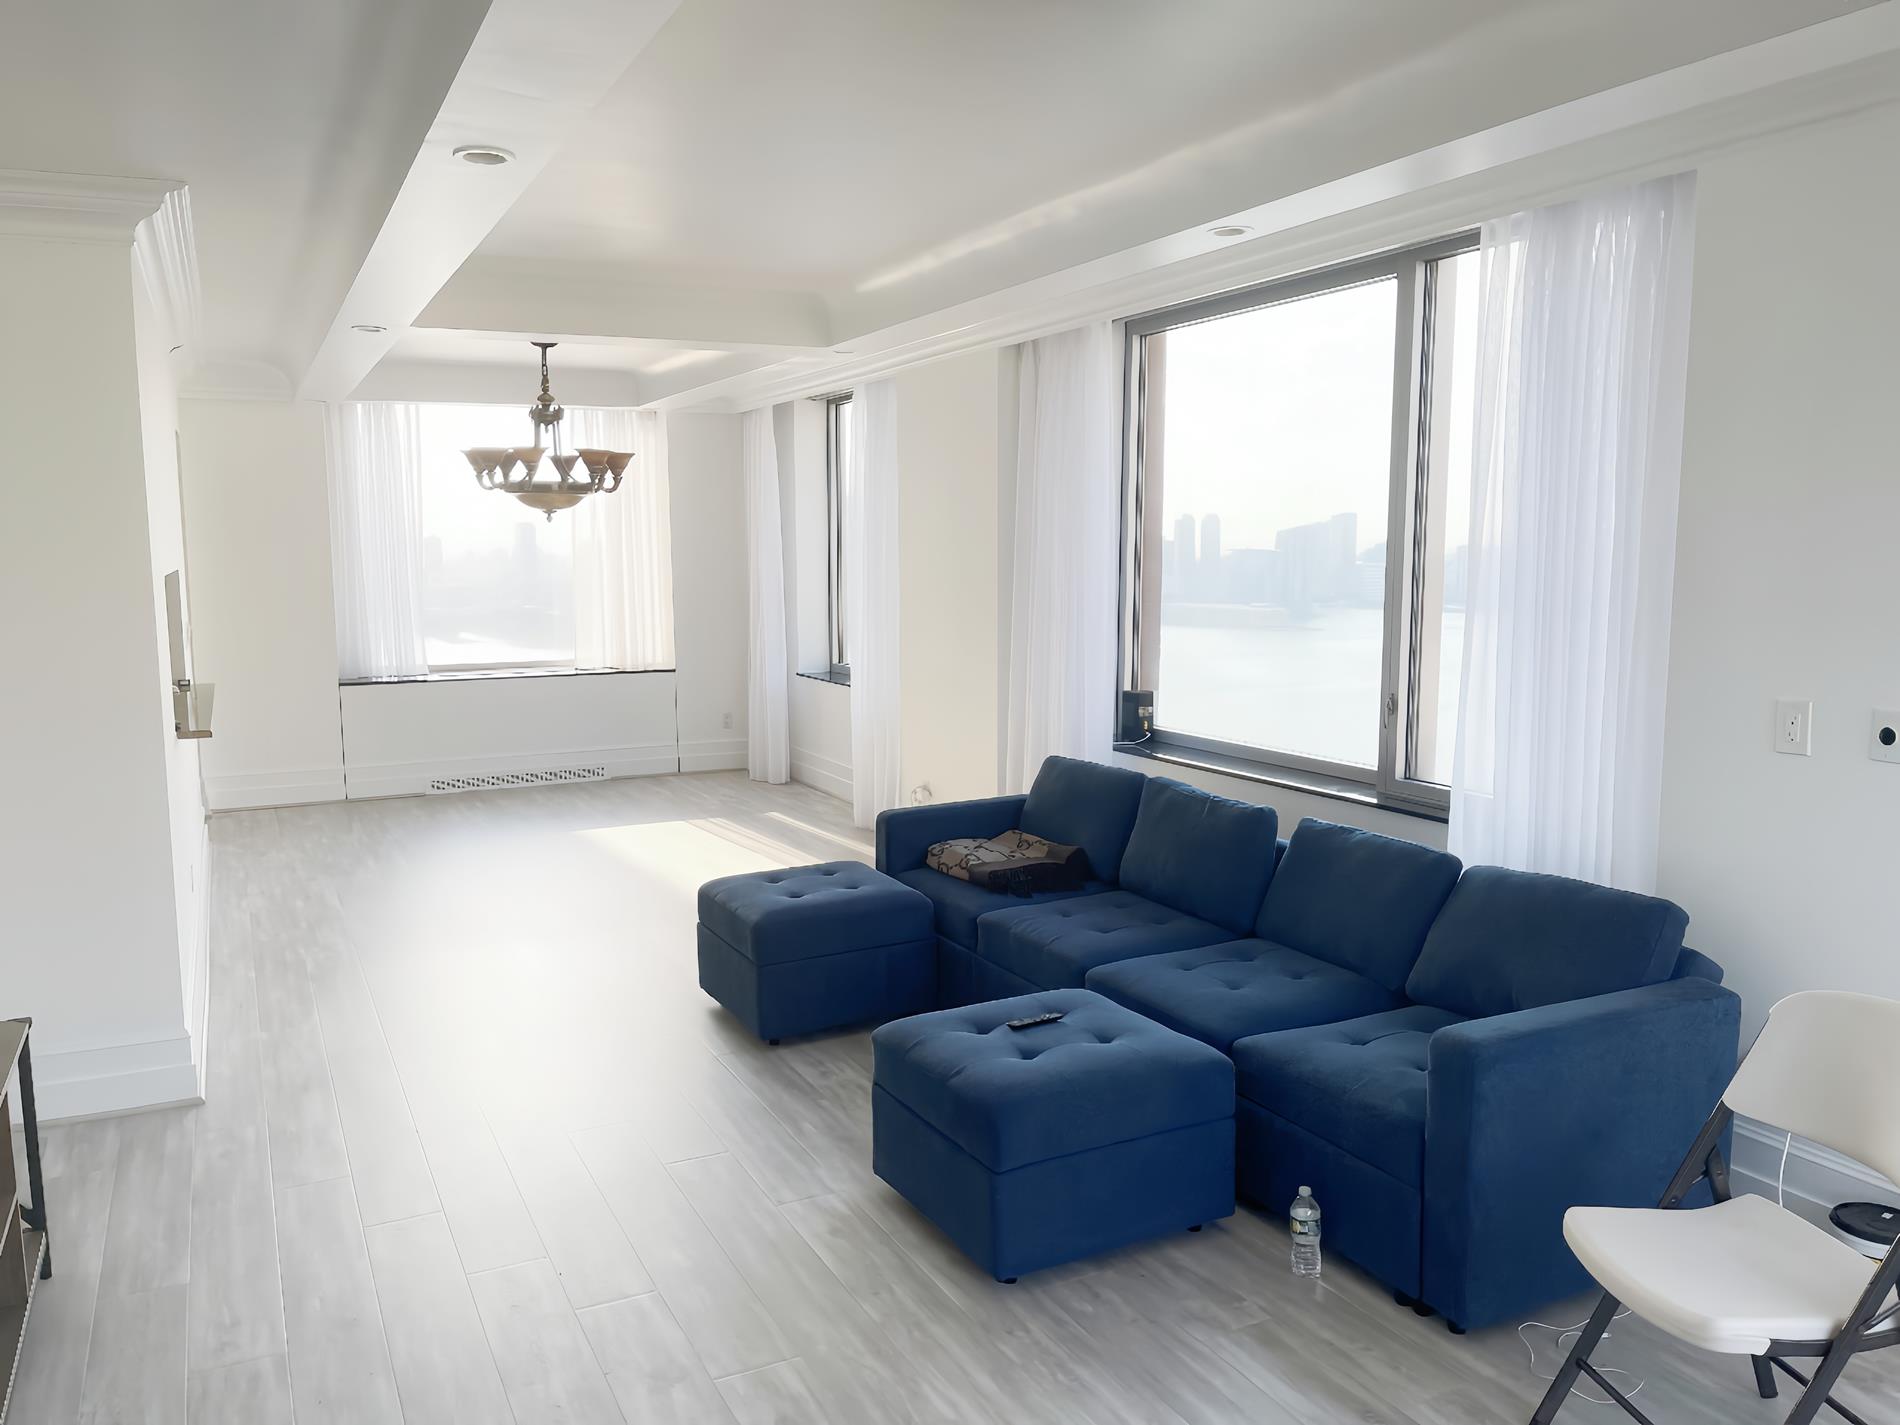 10 Little West Street 35-C, Battery Park City, Downtown, NYC - 2 Bedrooms  
2.5 Bathrooms  
4 Rooms - 